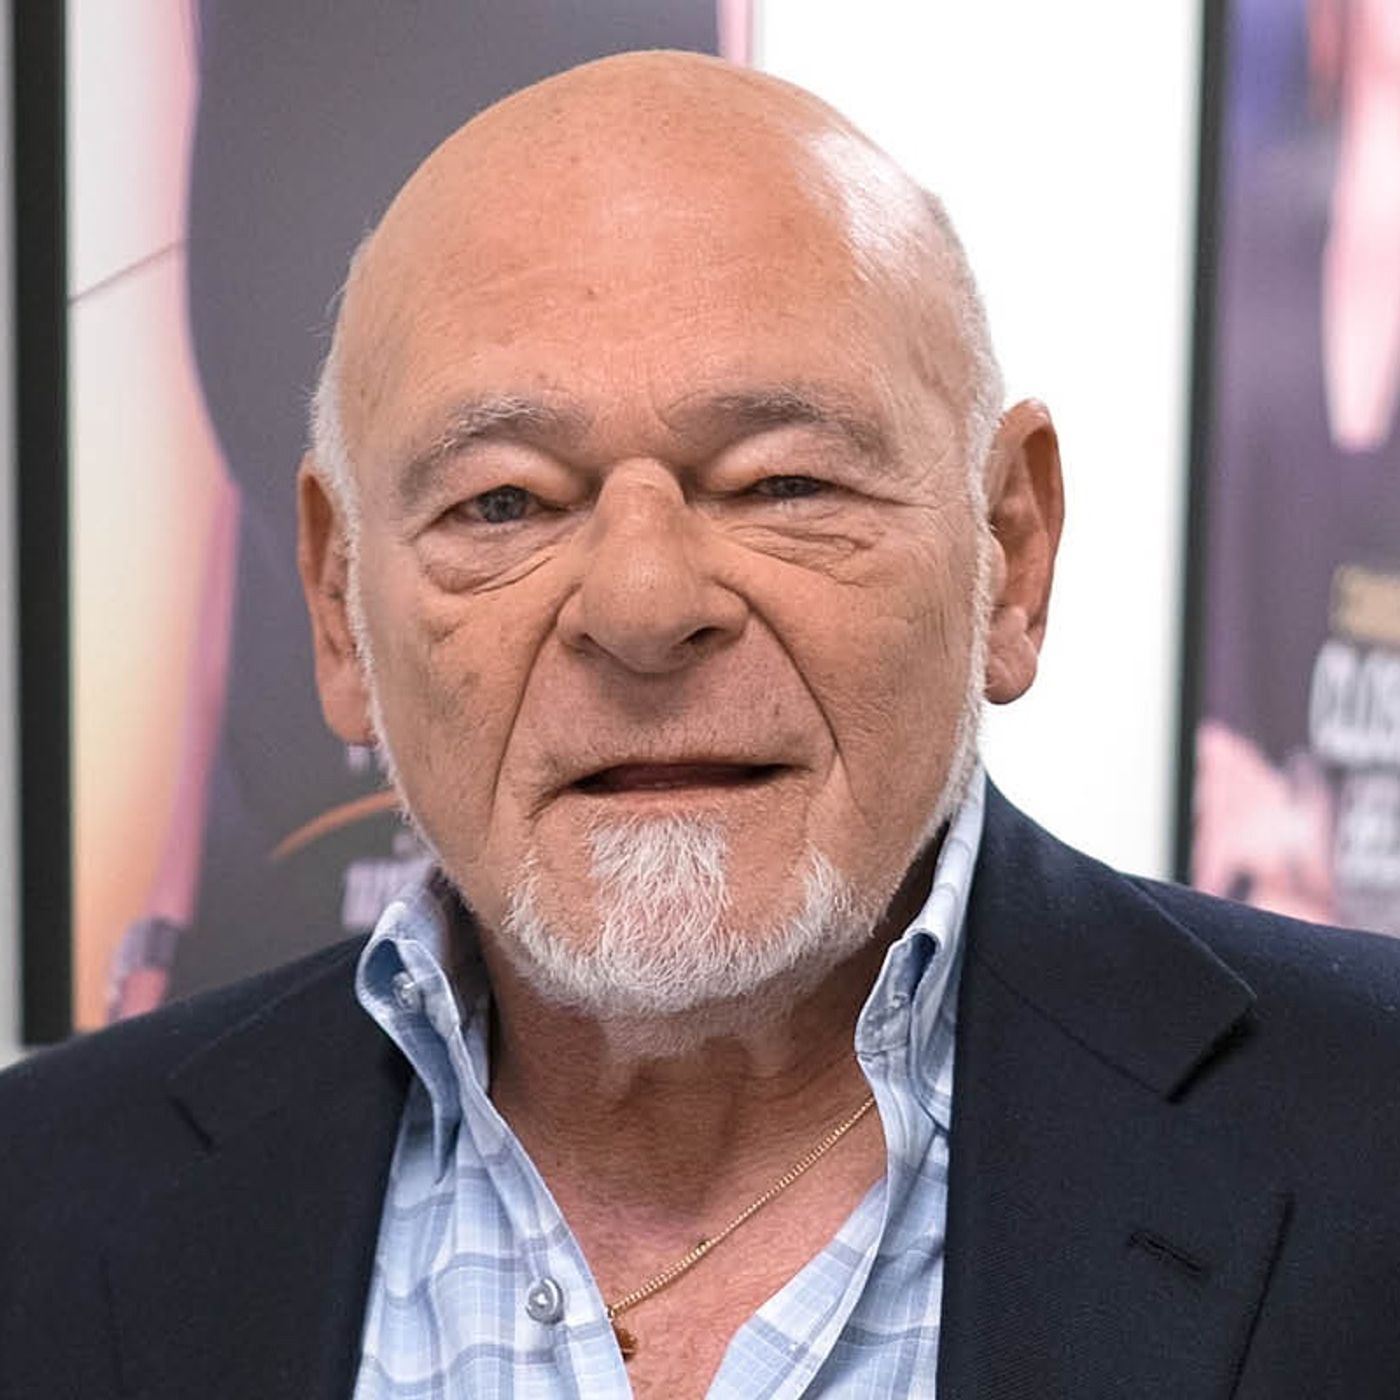 Billionaire Sam Zell Says Economy Is Scarred by Pandemic